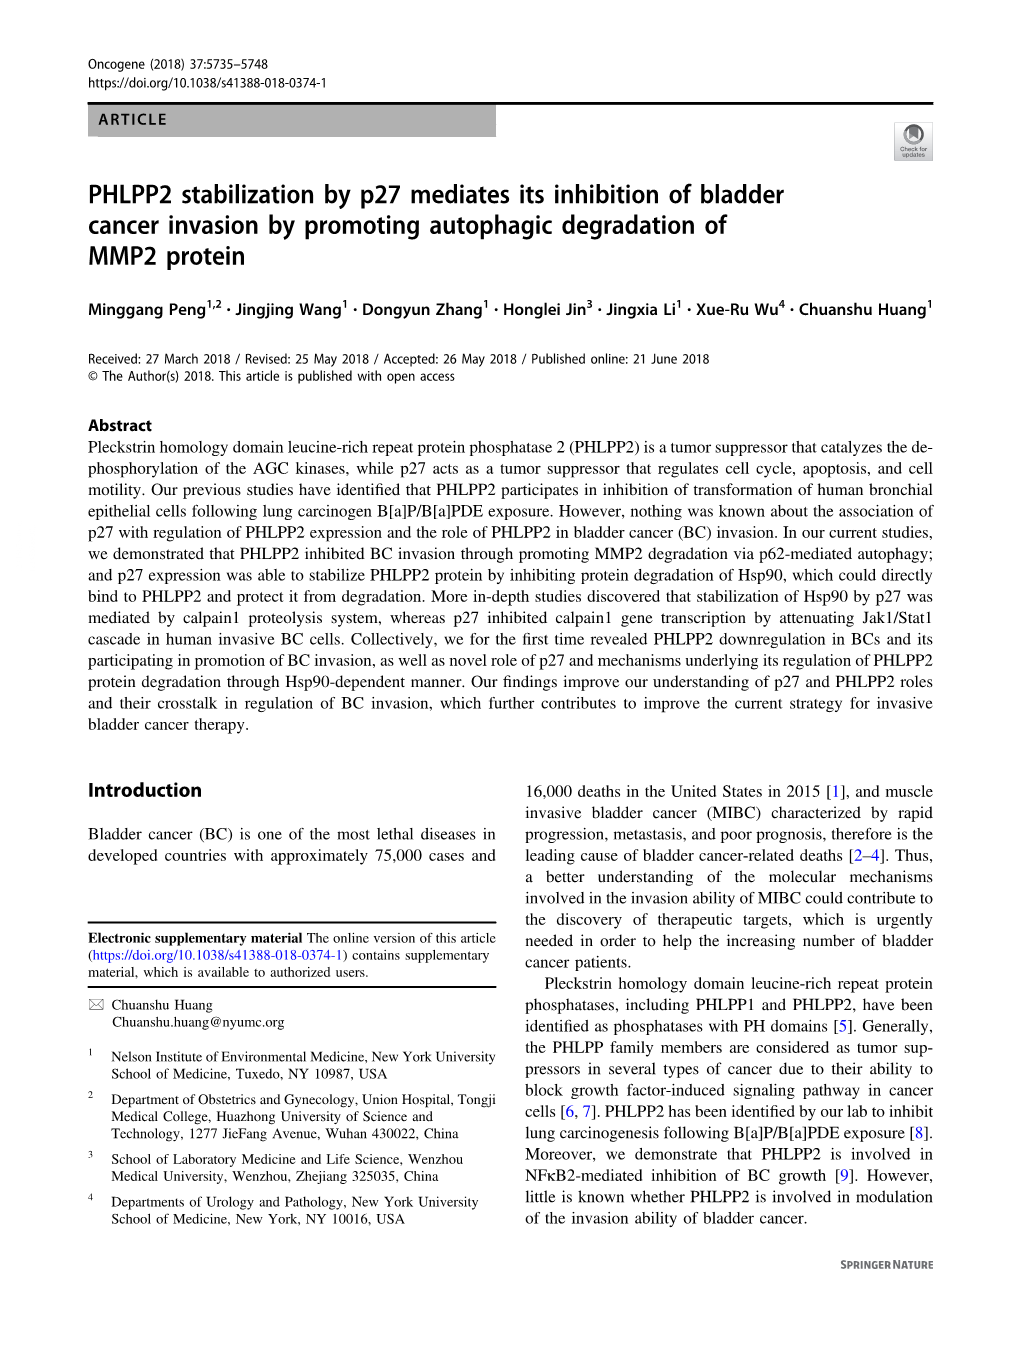 PHLPP2 Stabilization by P27 Mediates Its Inhibition of Bladder Cancer Invasion by Promoting Autophagic Degradation of MMP2 Protein